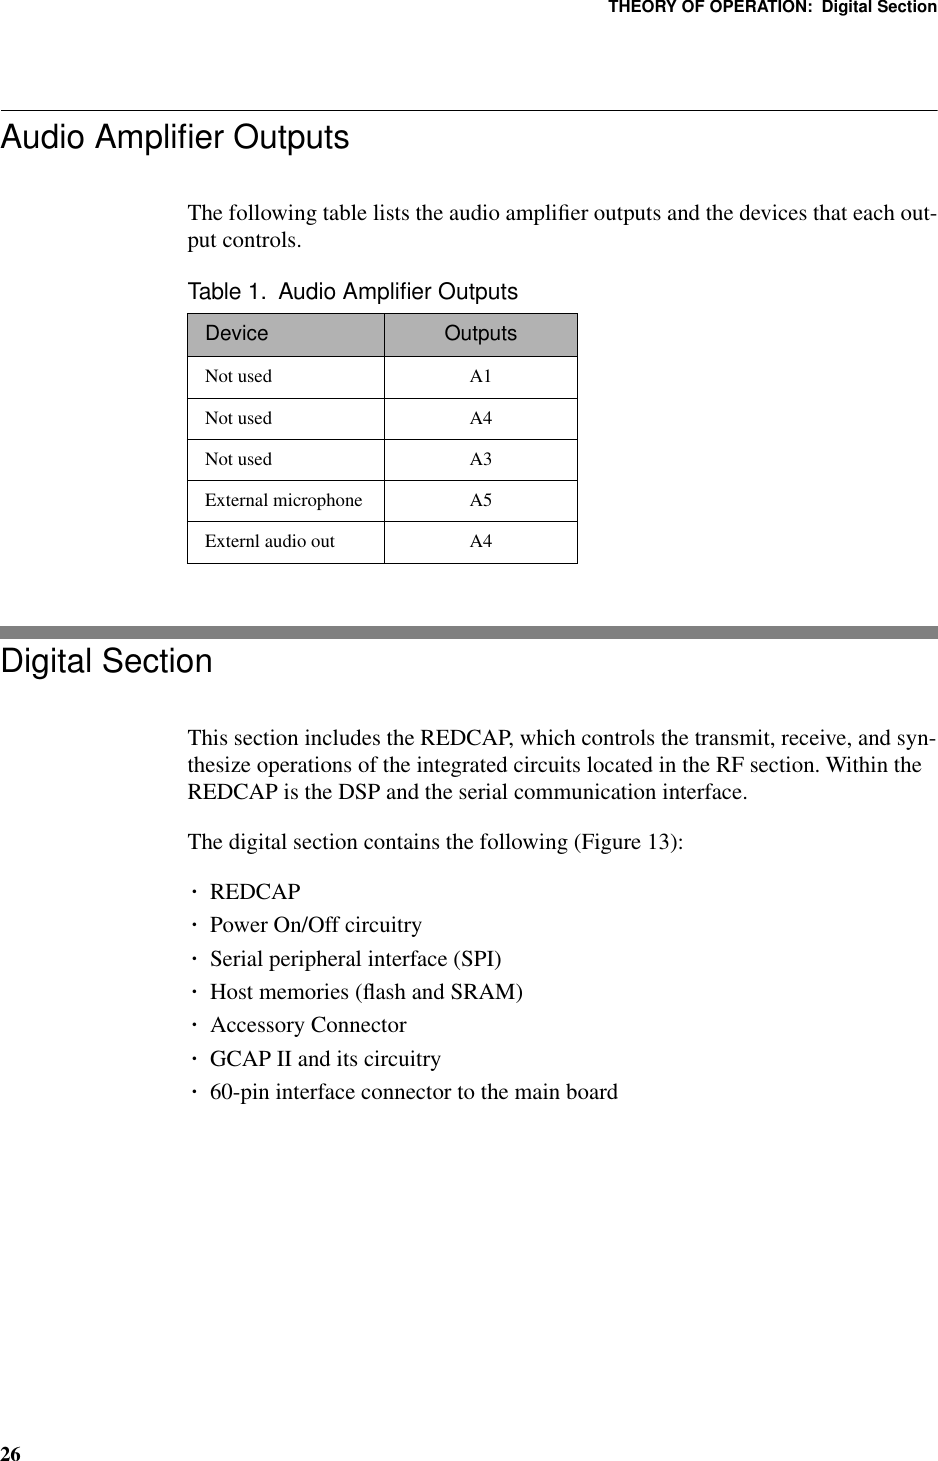 THEORY OF OPERATION:  Digital Section26Audio Ampliﬁer OutputsThe following table lists the audio ampliﬁer outputs and the devices that each out-put controls.Digital SectionThis section includes the REDCAP, which controls the transmit, receive, and syn-thesize operations of the integrated circuits located in the RF section. Within the REDCAP is the DSP and the serial communication interface.The digital section contains the following (Figure 13):¥REDCAP¥Power On/Off circuitry¥Serial peripheral interface (SPI)¥Host memories (ﬂash and SRAM)¥Accessory Connector¥GCAP II and its circuitry¥60-pin interface connector to the main boardTable 1.  Audio Ampliﬁer OutputsDevice OutputsNot used A1Not used A4  Not used A3External microphone A5Externl audio out A4